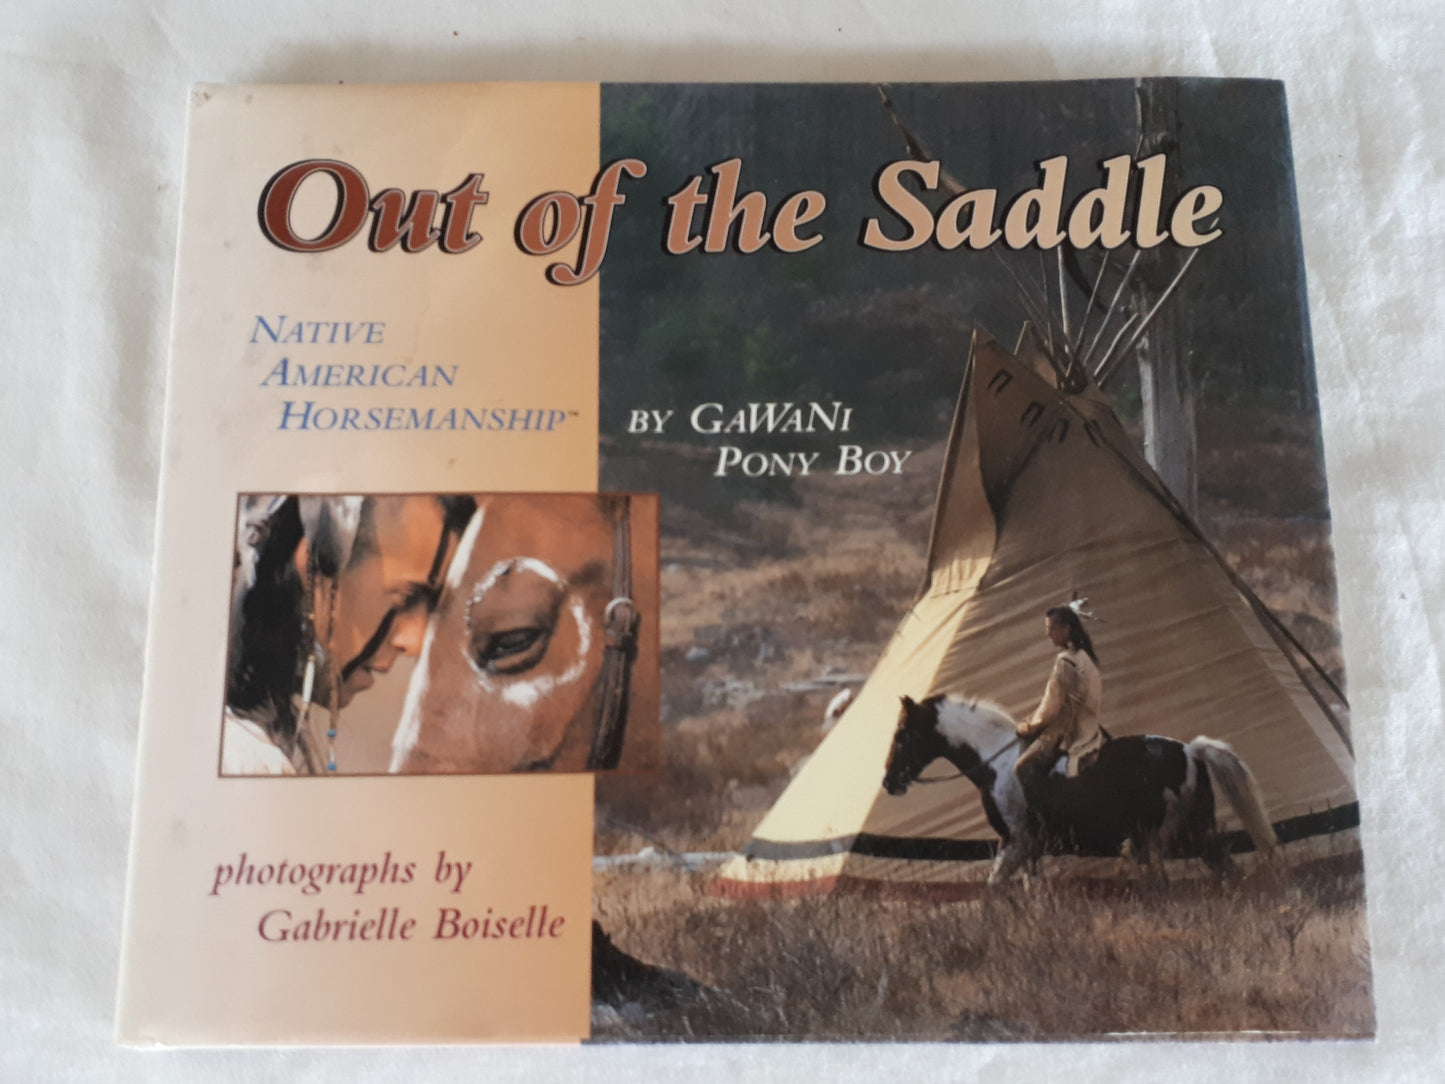 Out of the Saddle  Native American Horsemanship  by GaWaNi Pony Boy, photographs by Gabrielle Boiselle